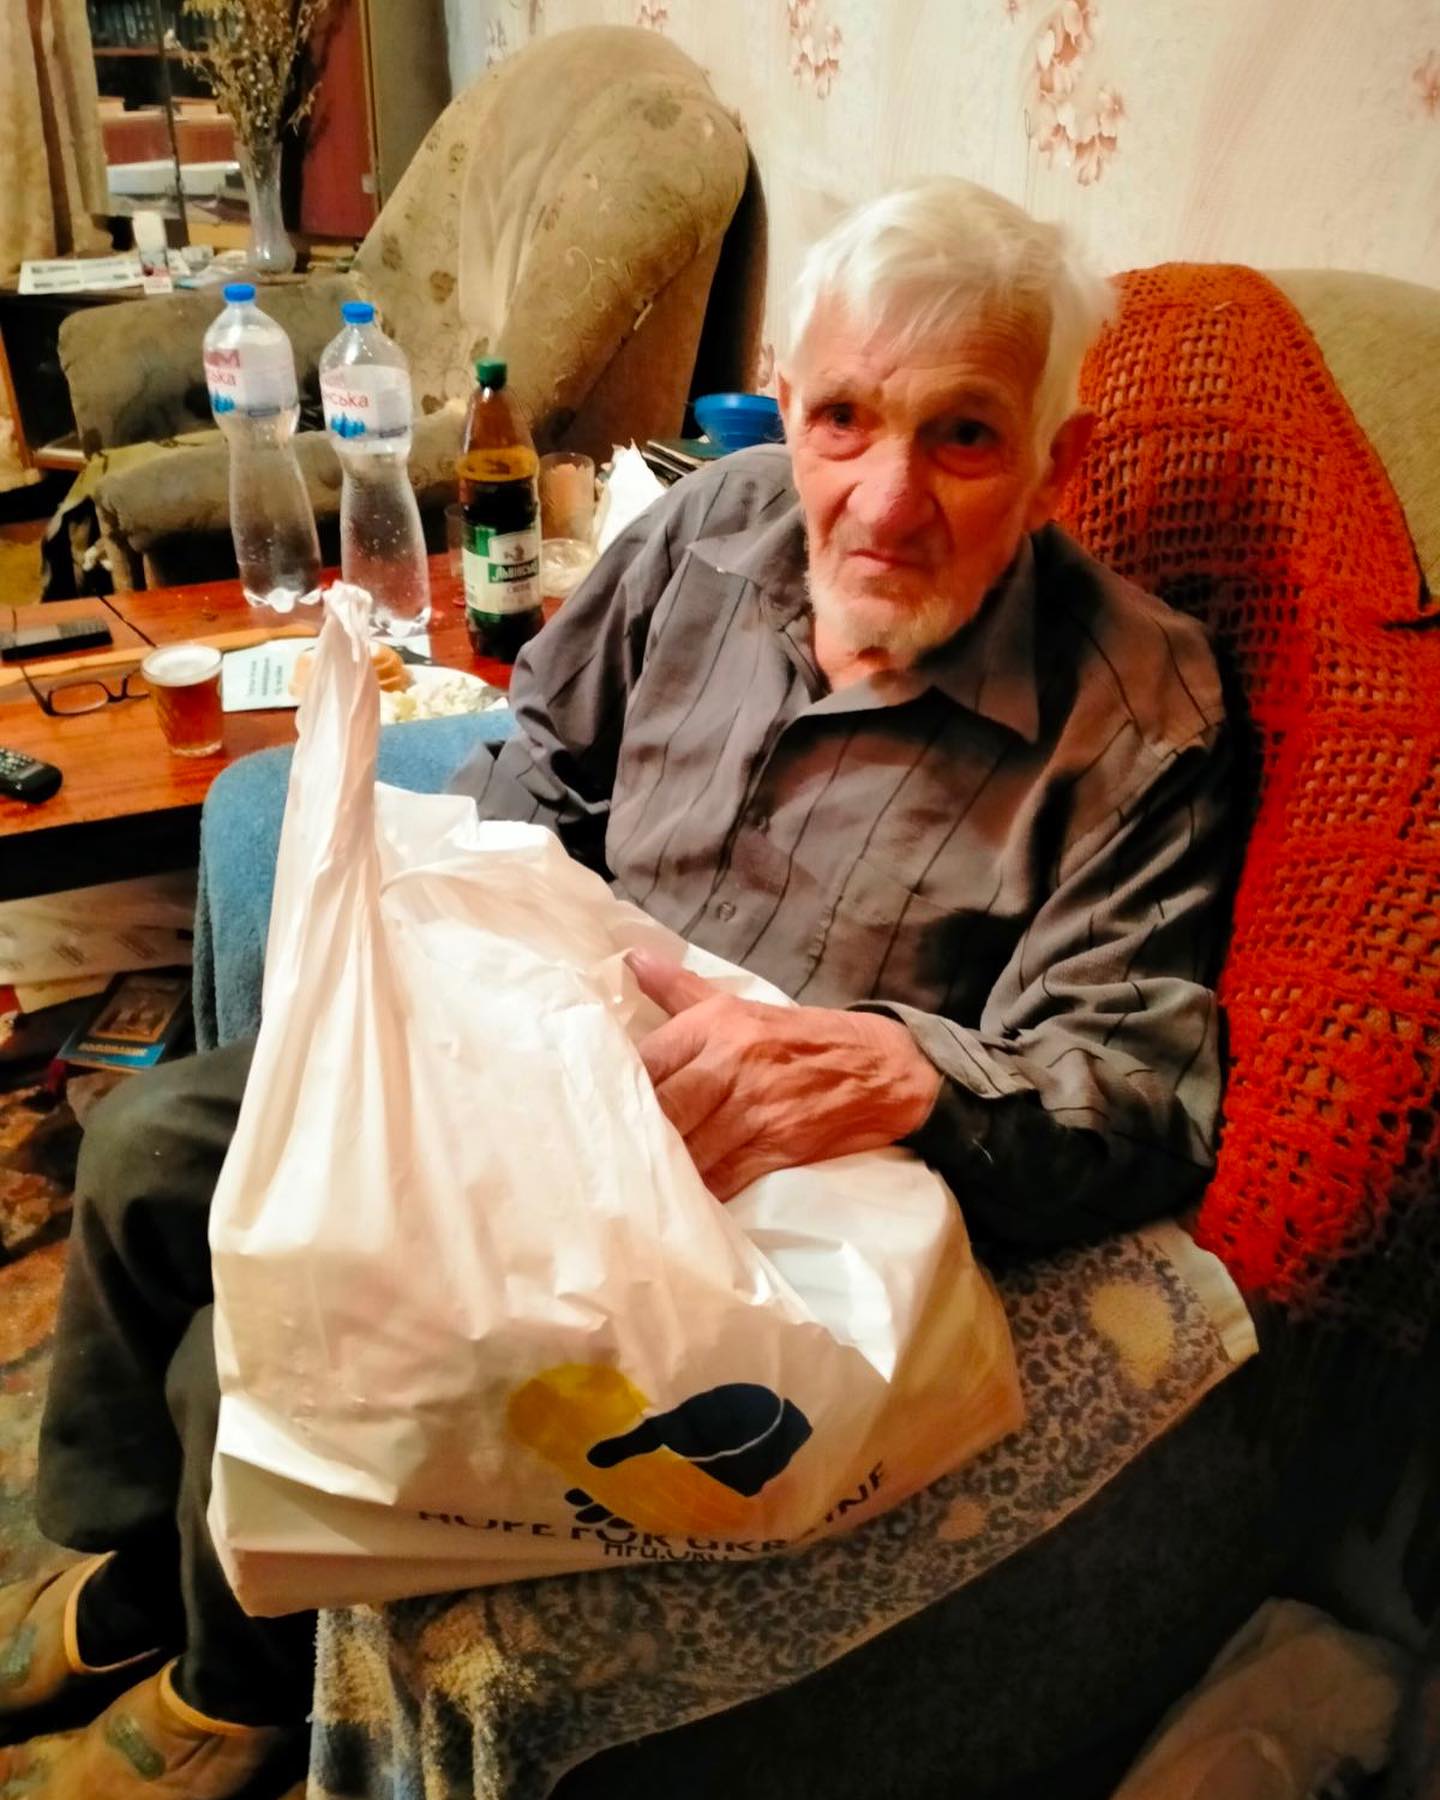 A man sitting on a couch holding a shopping bag.